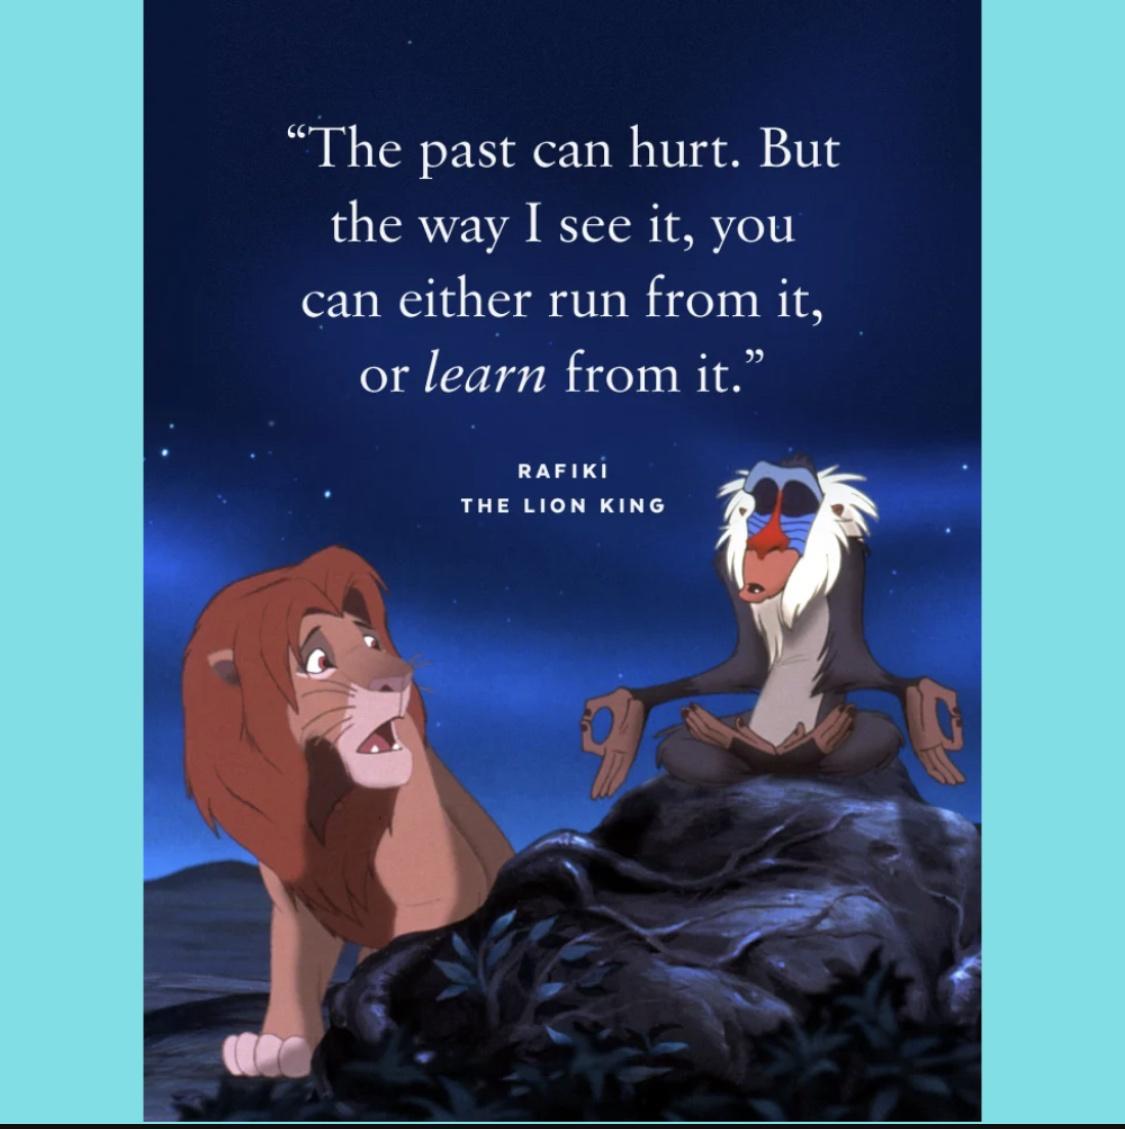 dank memes - rafiki lion king - "The past can hurt. But the way I see it, you can either run from it, or learn from it." Rafiki The Lion King